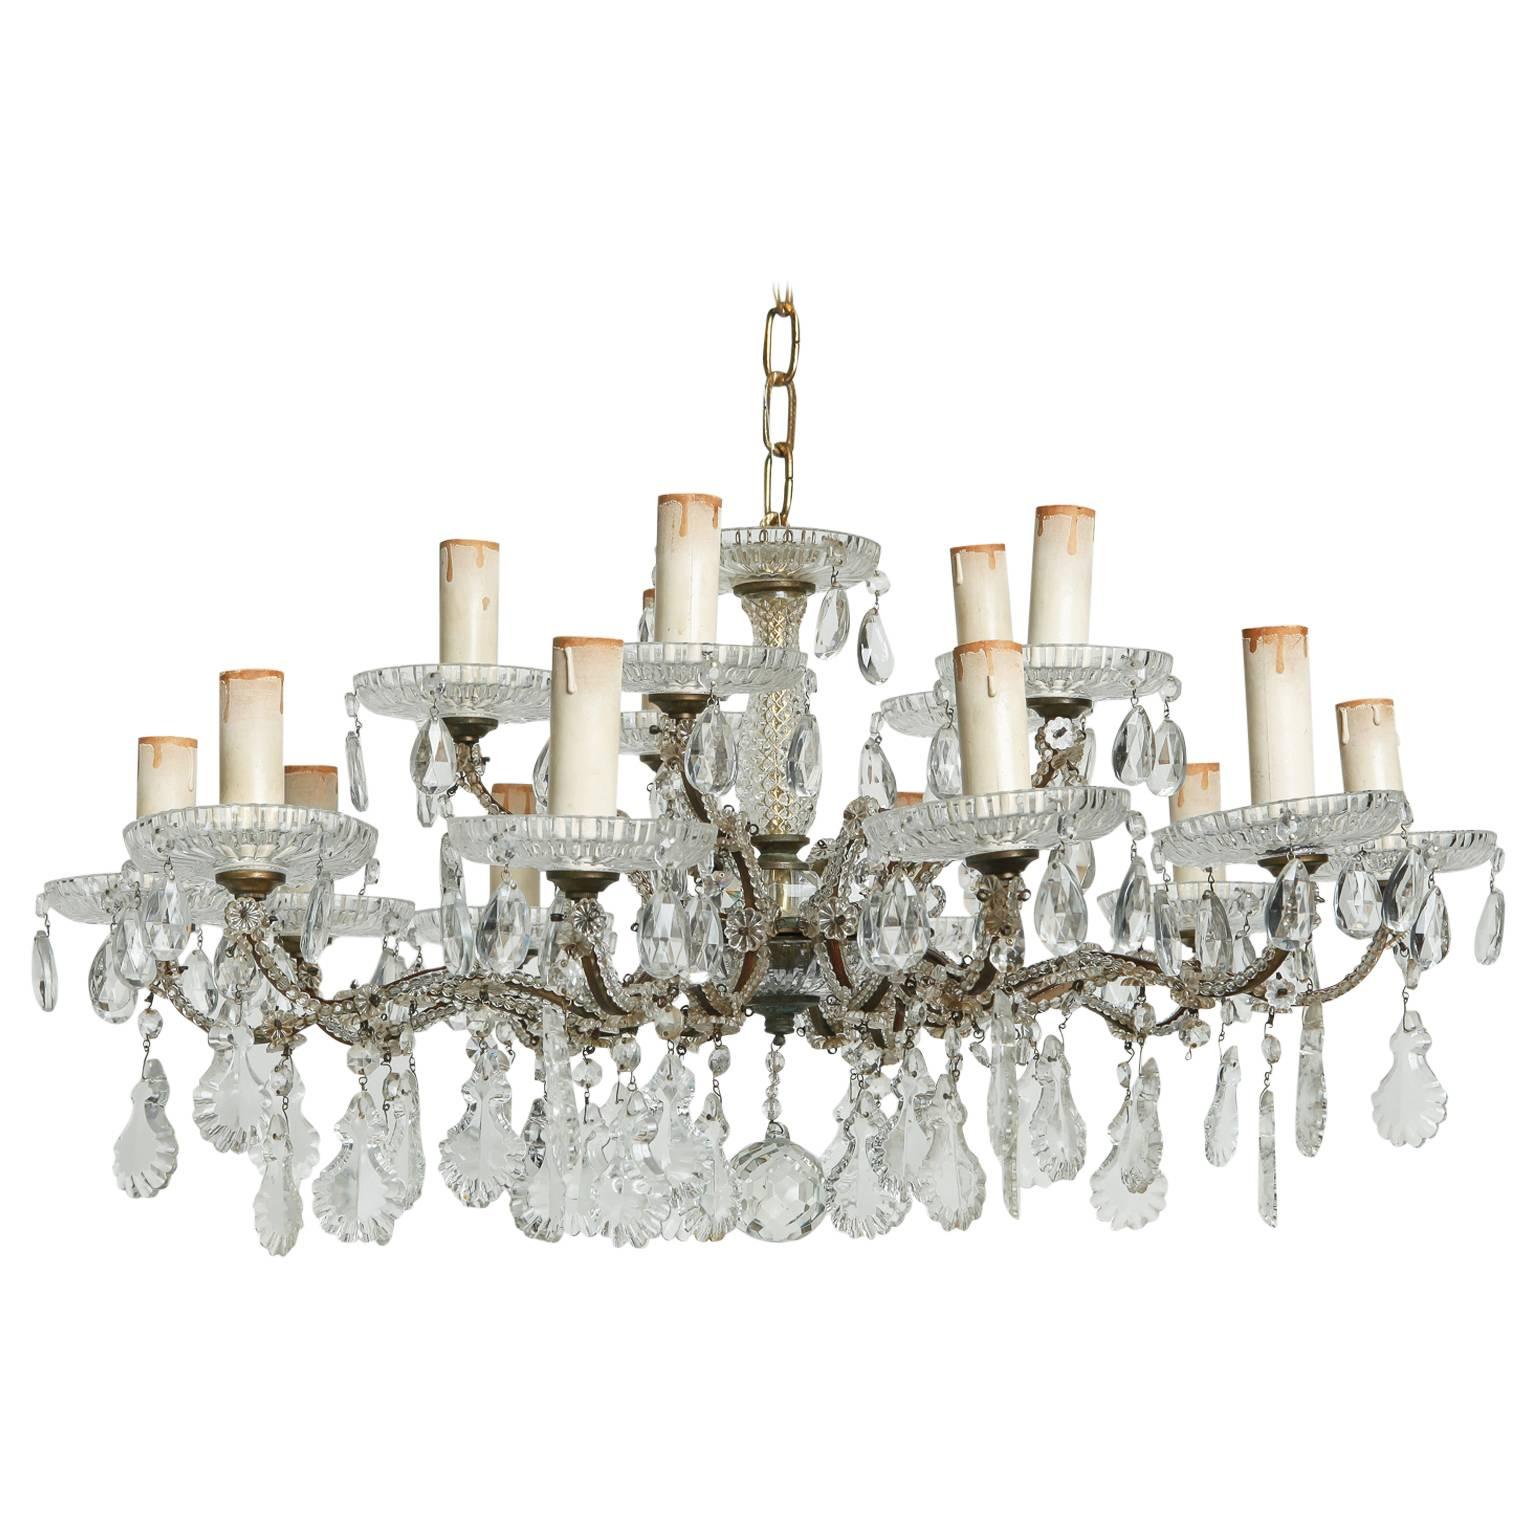 French Fifteen-Light Shallow Beaded Crystal Chandelier